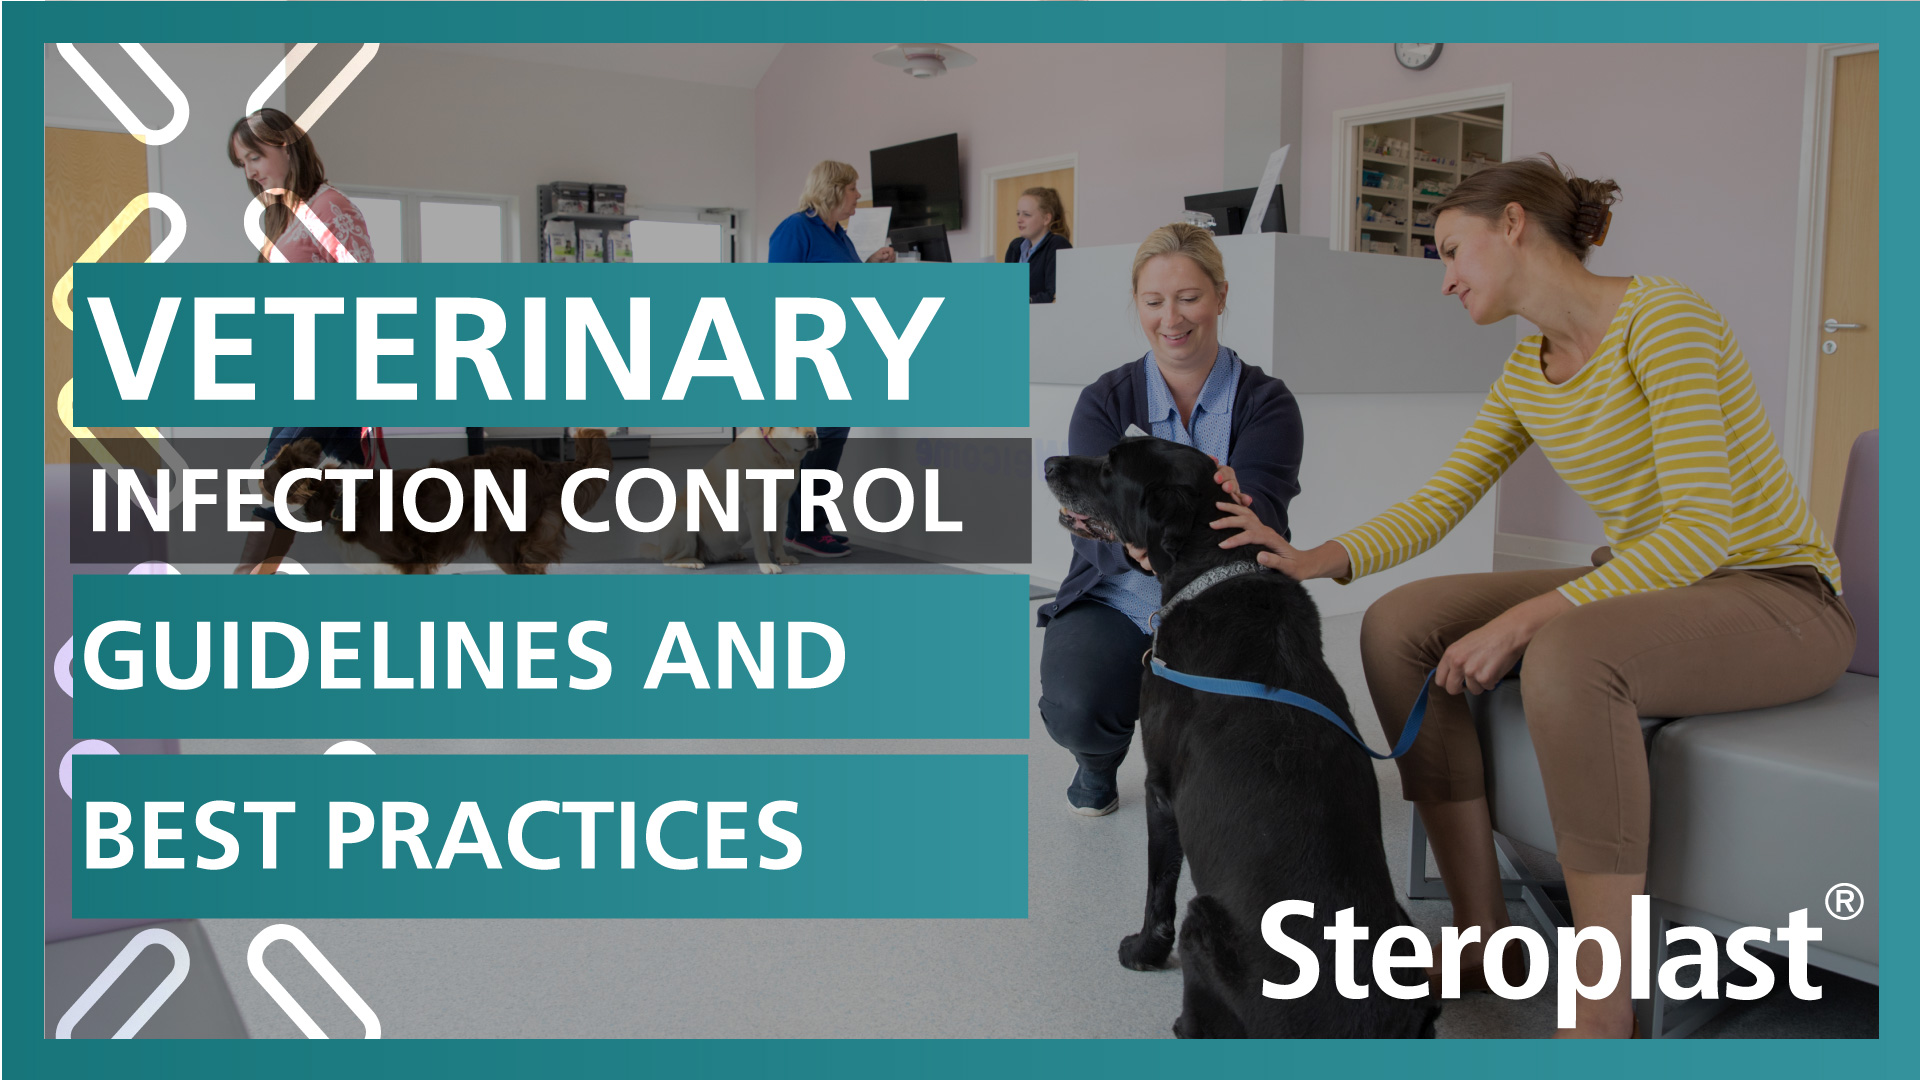 Veterinary-Infection-Control-Guidelines-and-Best-Practices